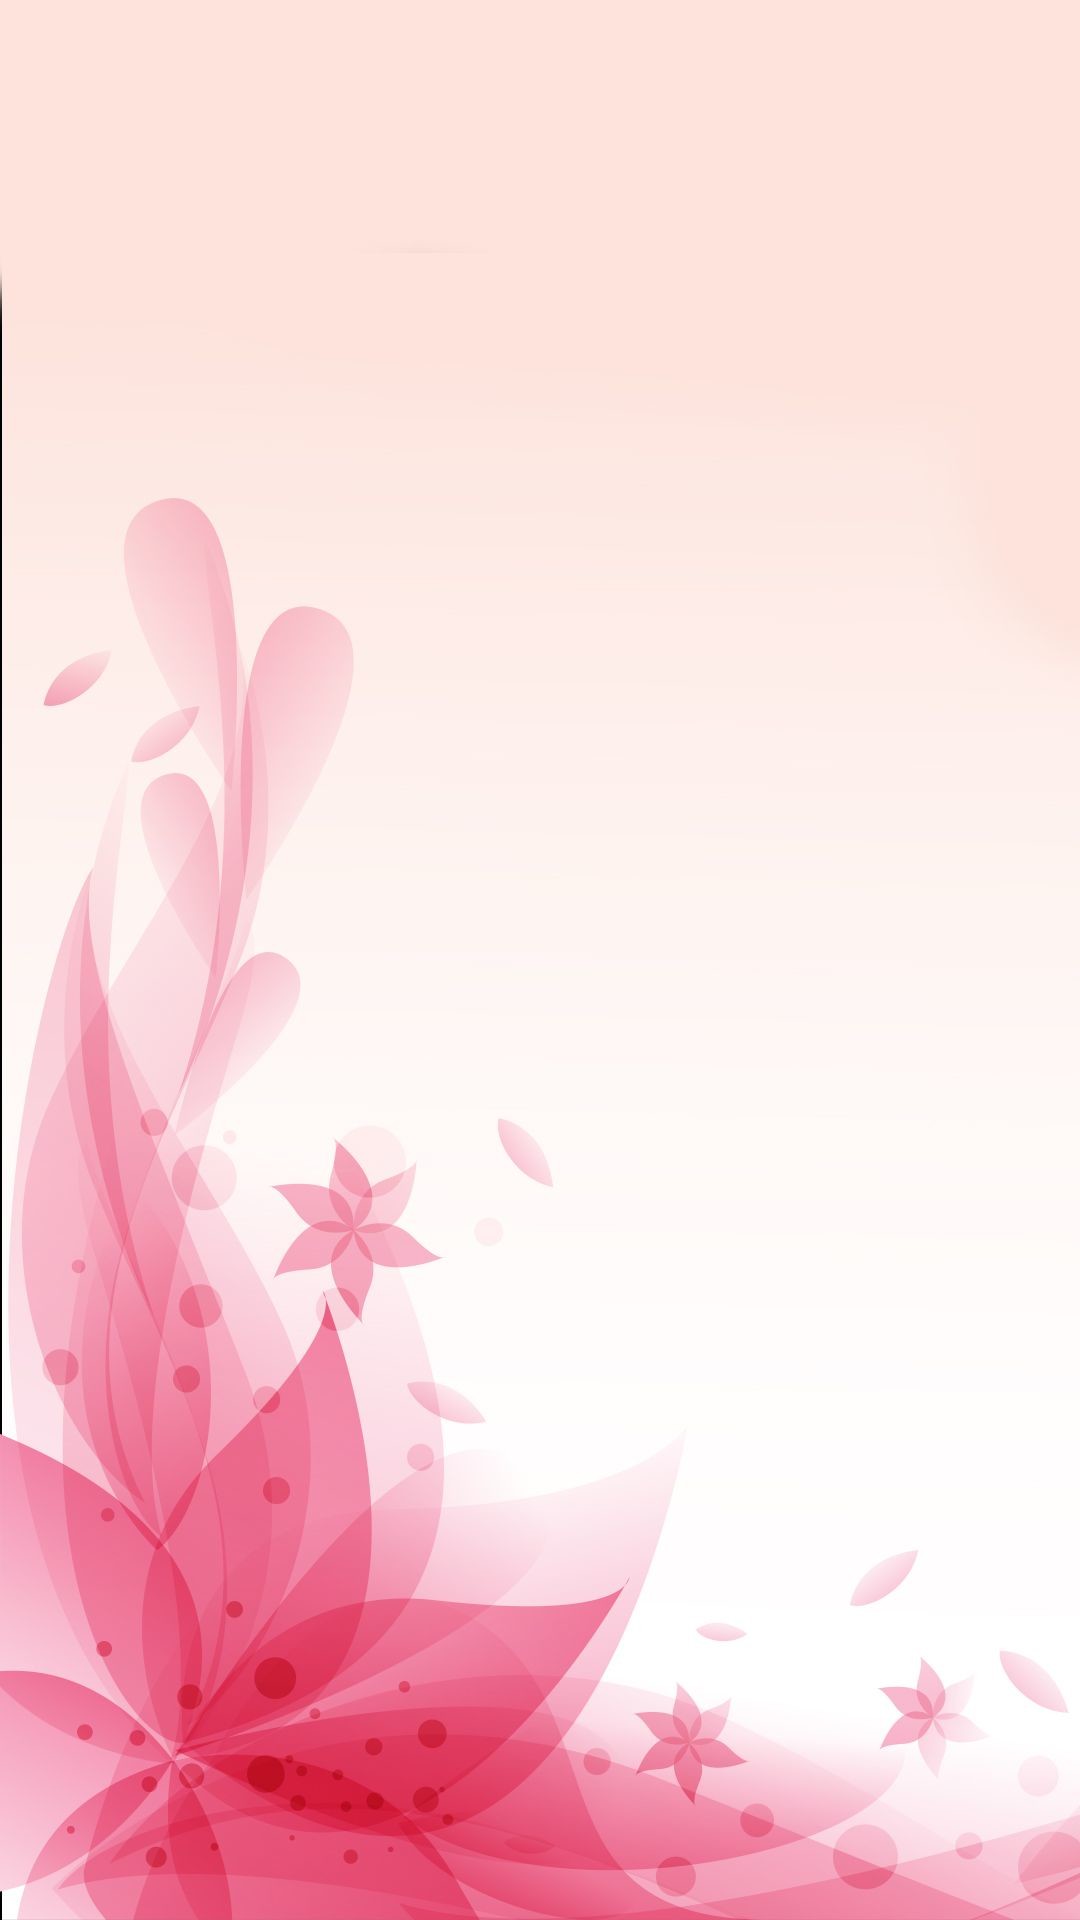 1080x1920 Pretty flowers on pink background. Pink pastel flowers, pretty backgrounds,  backgrounds 2017, sazum backgrounds for iphone, Android HD